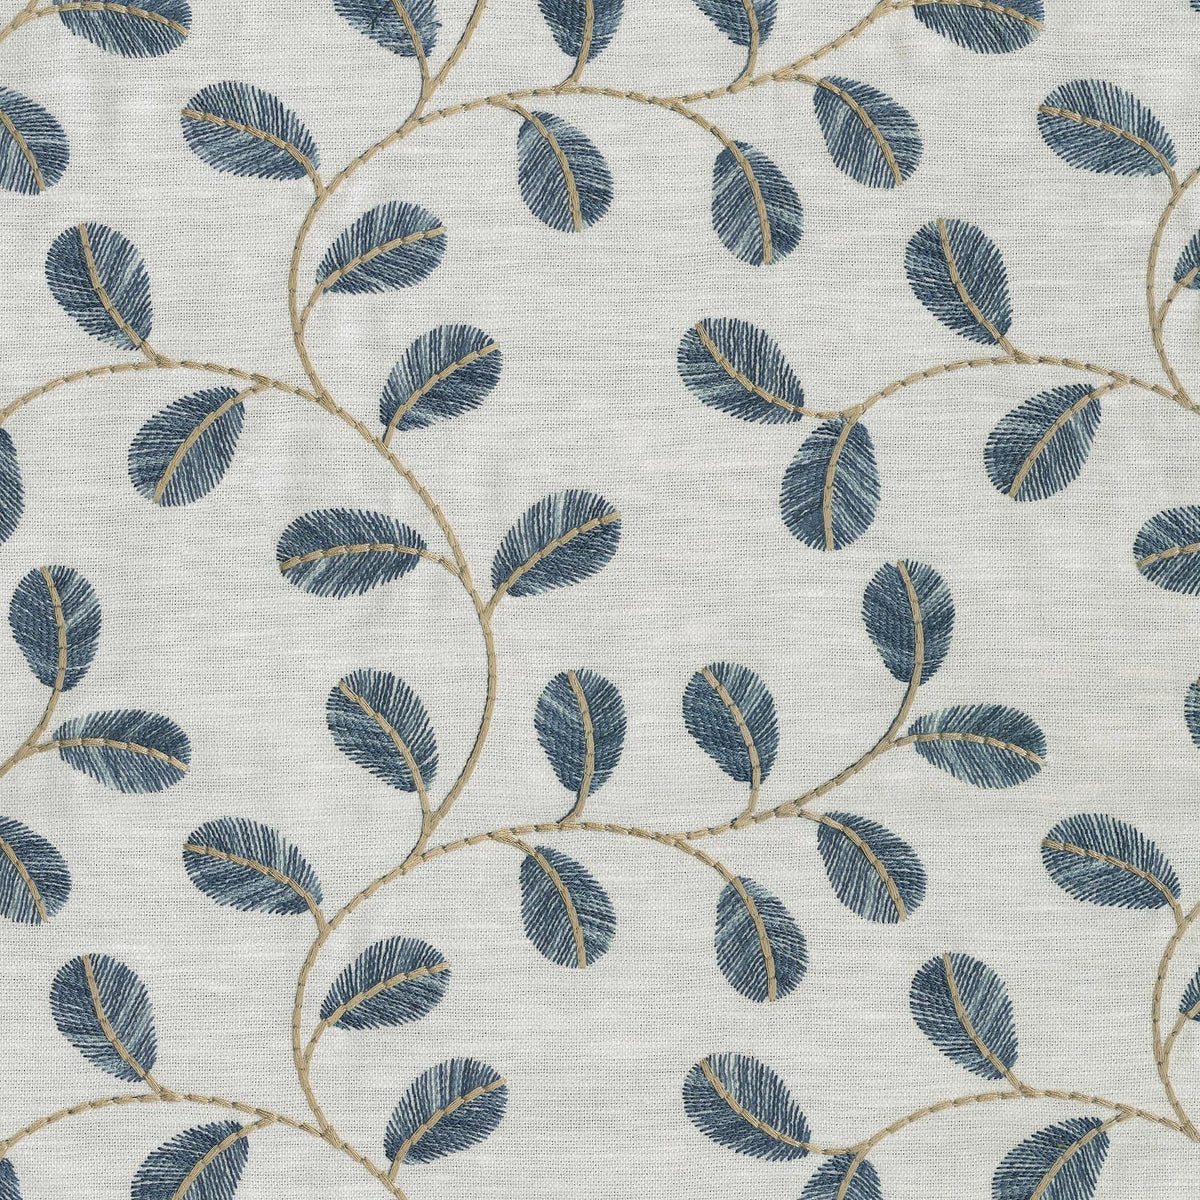 P/K Lifestyles Leaf Love Embroidery - Lapis 410532 Fabric Swatch